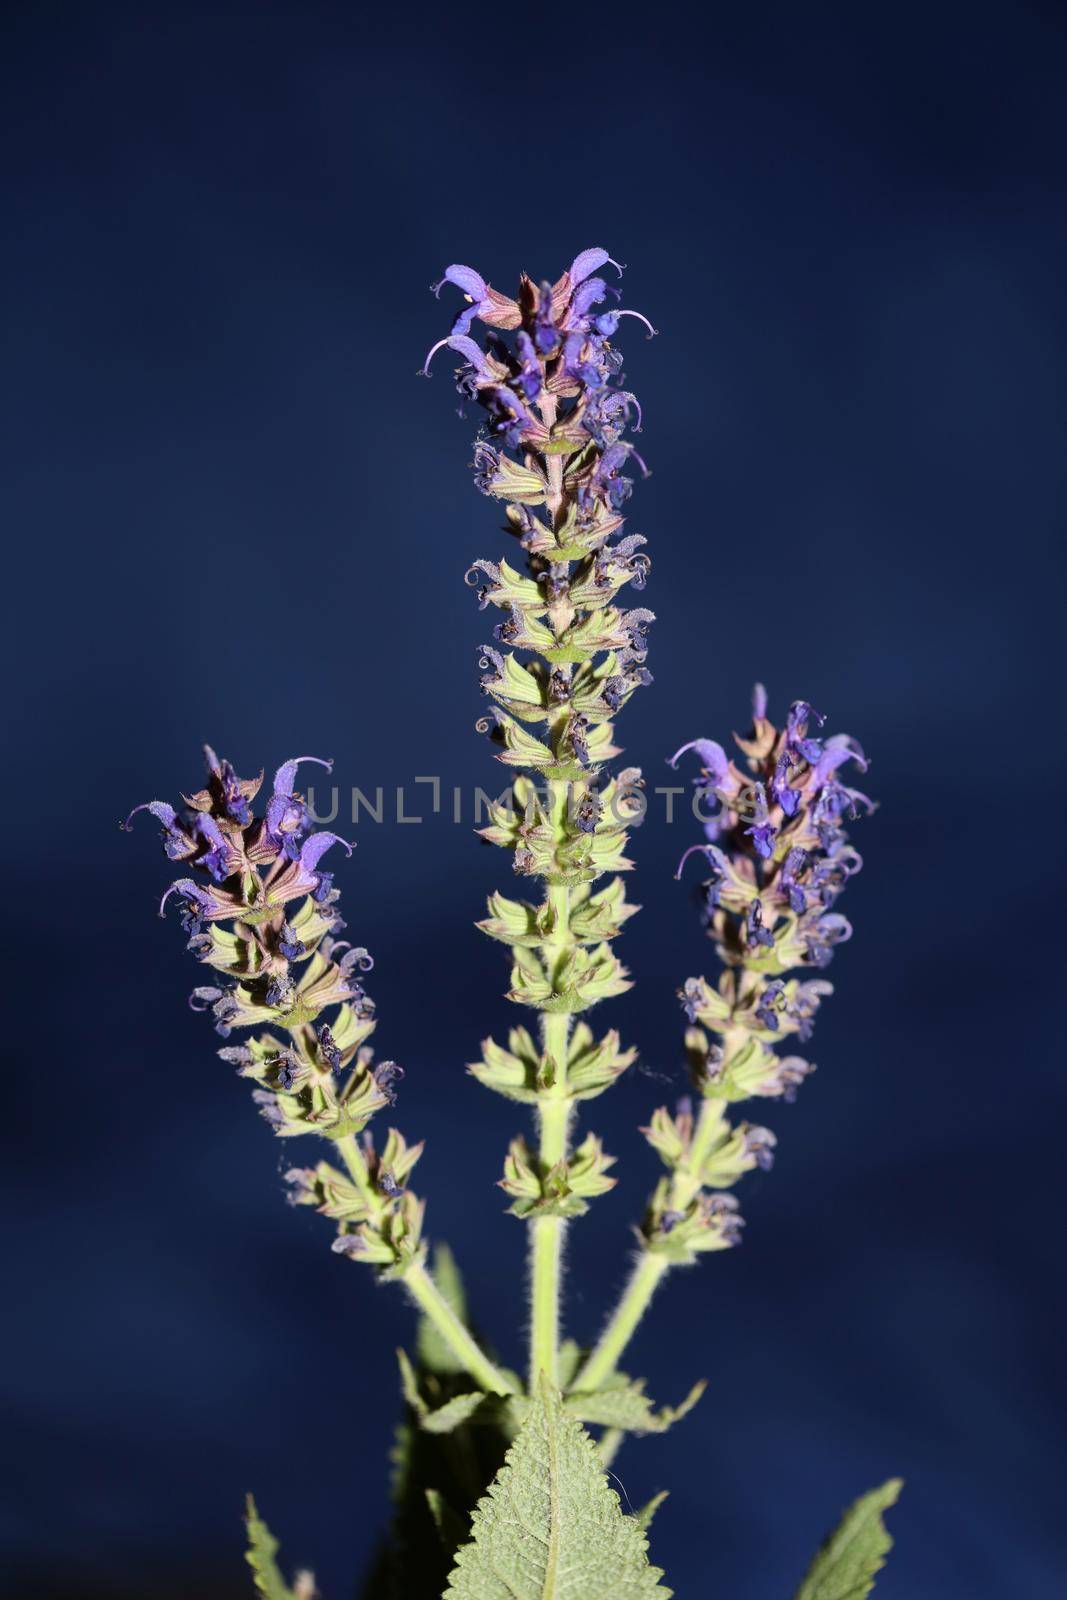 Flower blossoming salvia nemorosa family lamiaceae close up botanical background high quality big size print home decor agricultural plants by BakalaeroZz